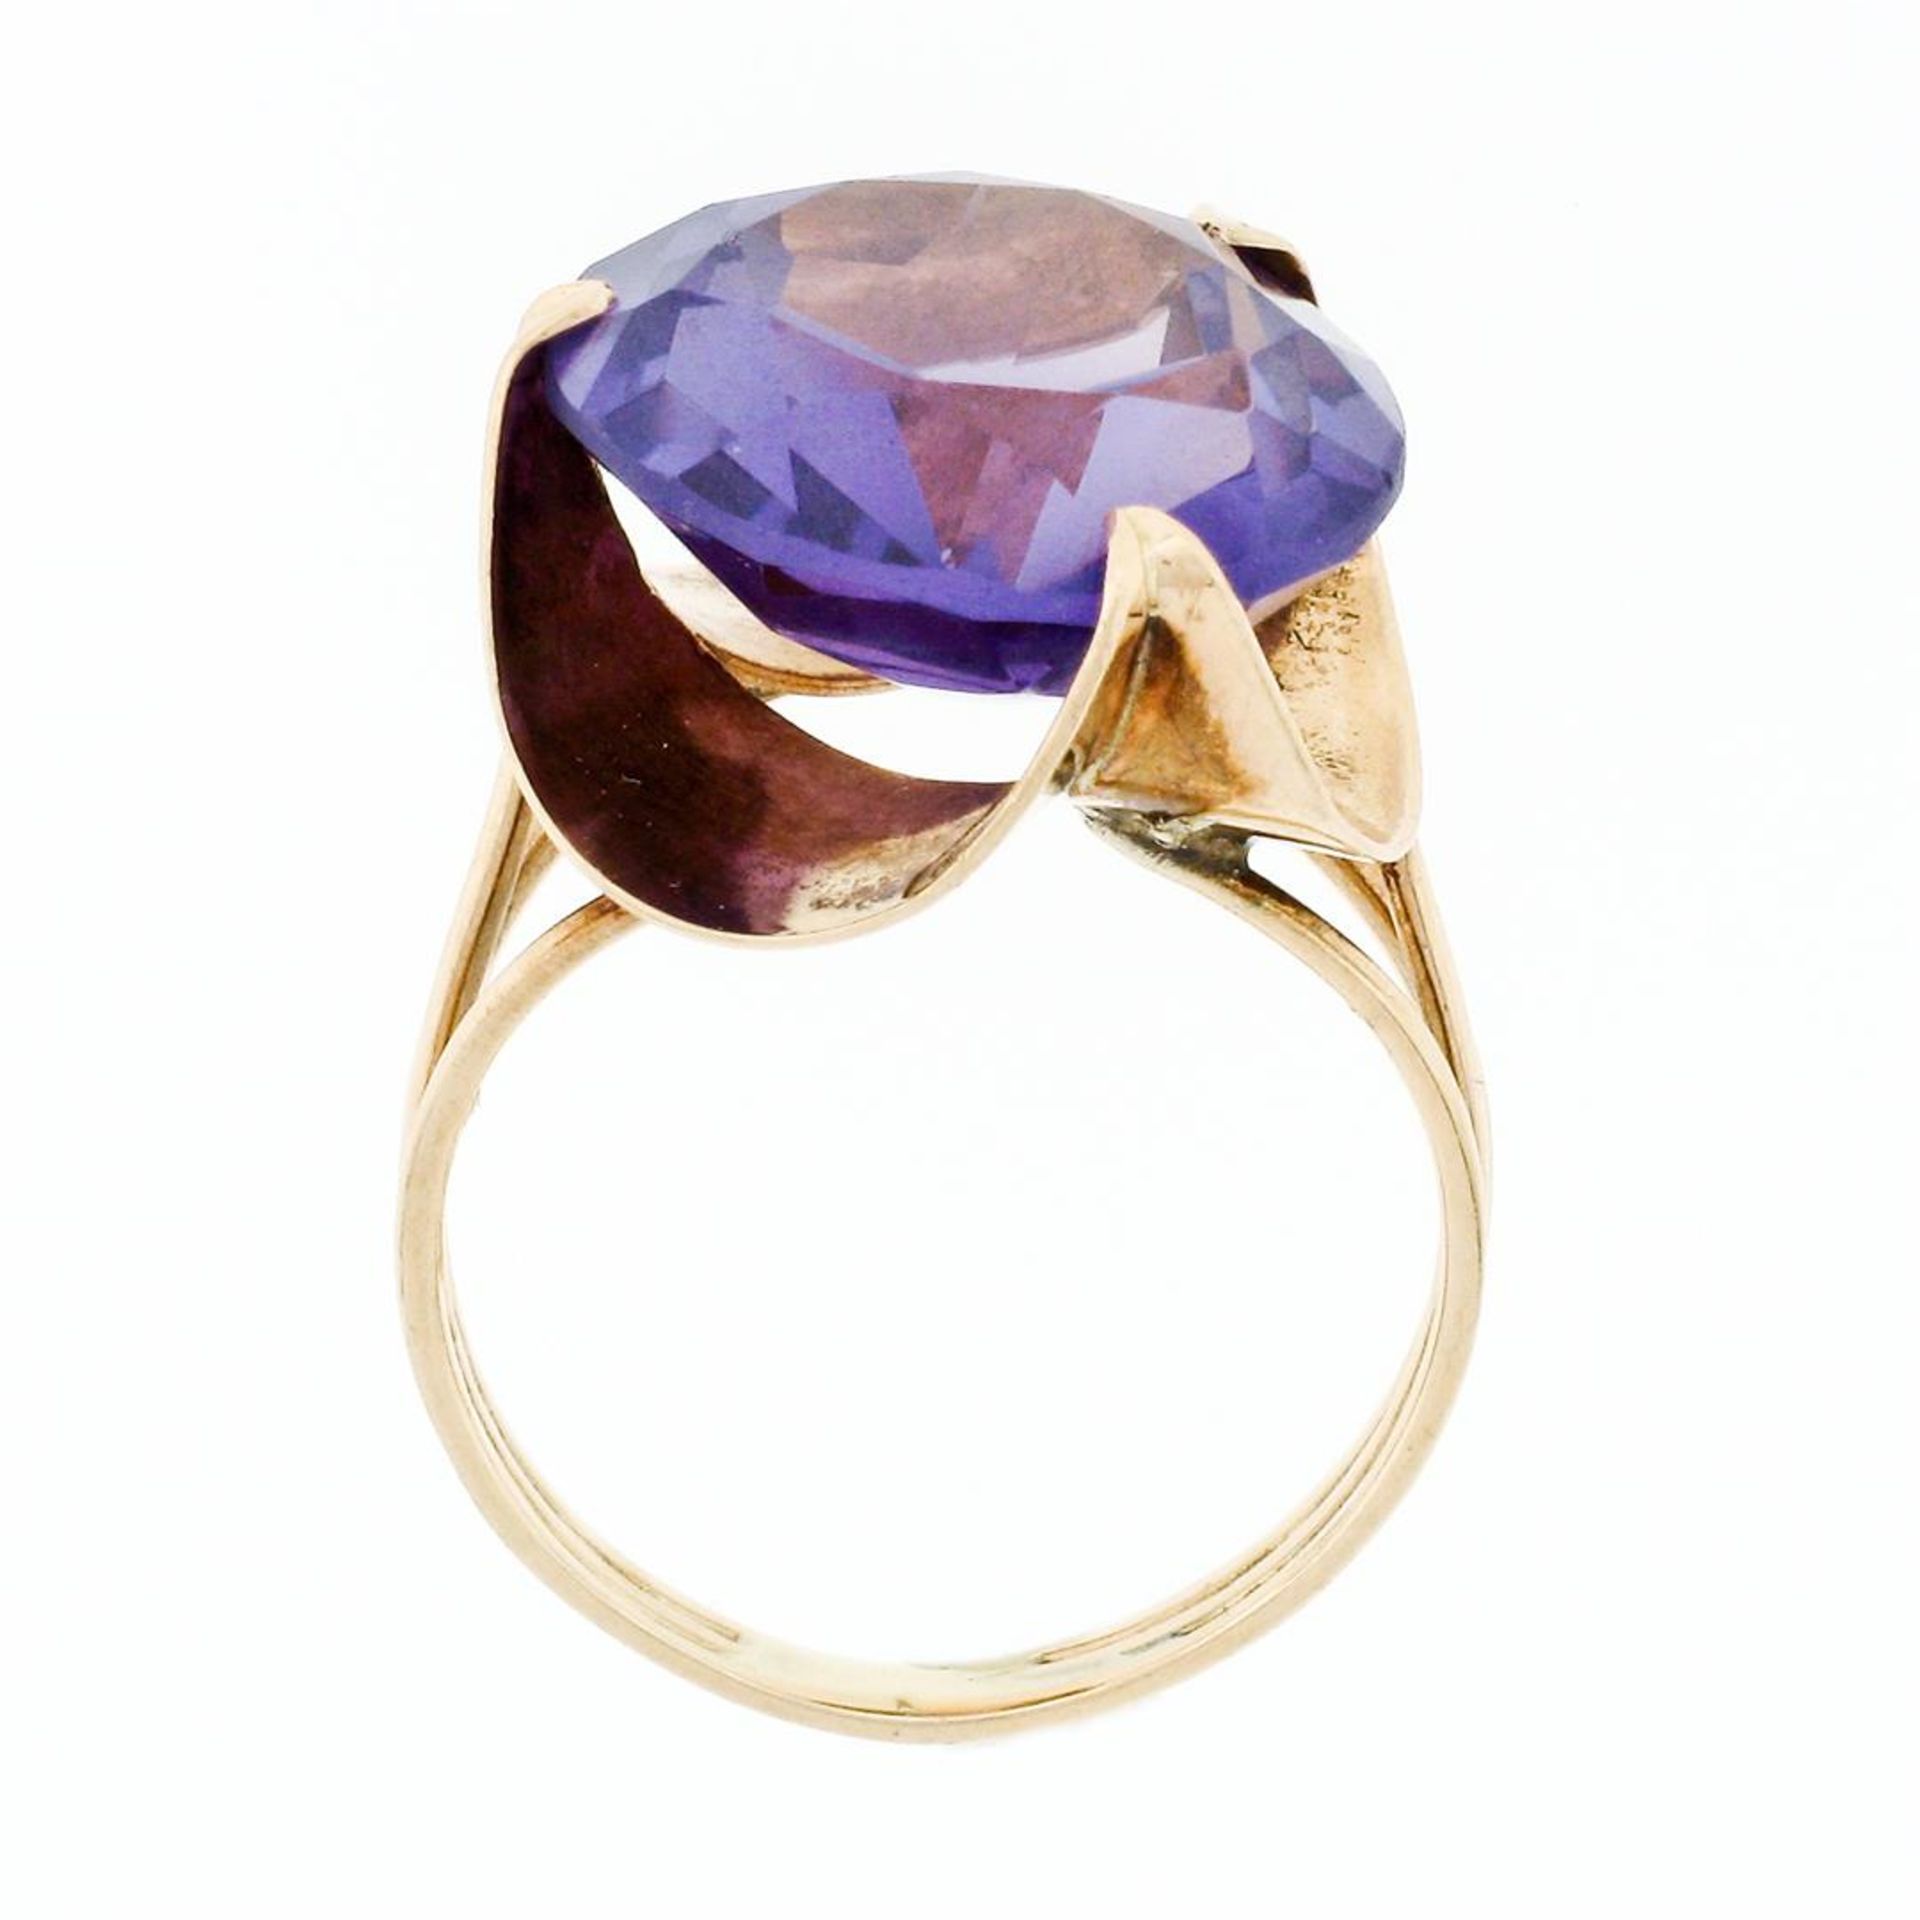 Retro Vintage Handmade 14k Rose Gold 13.7mm Synthetic Alexandrite Solitaire Ring - Image 8 of 8